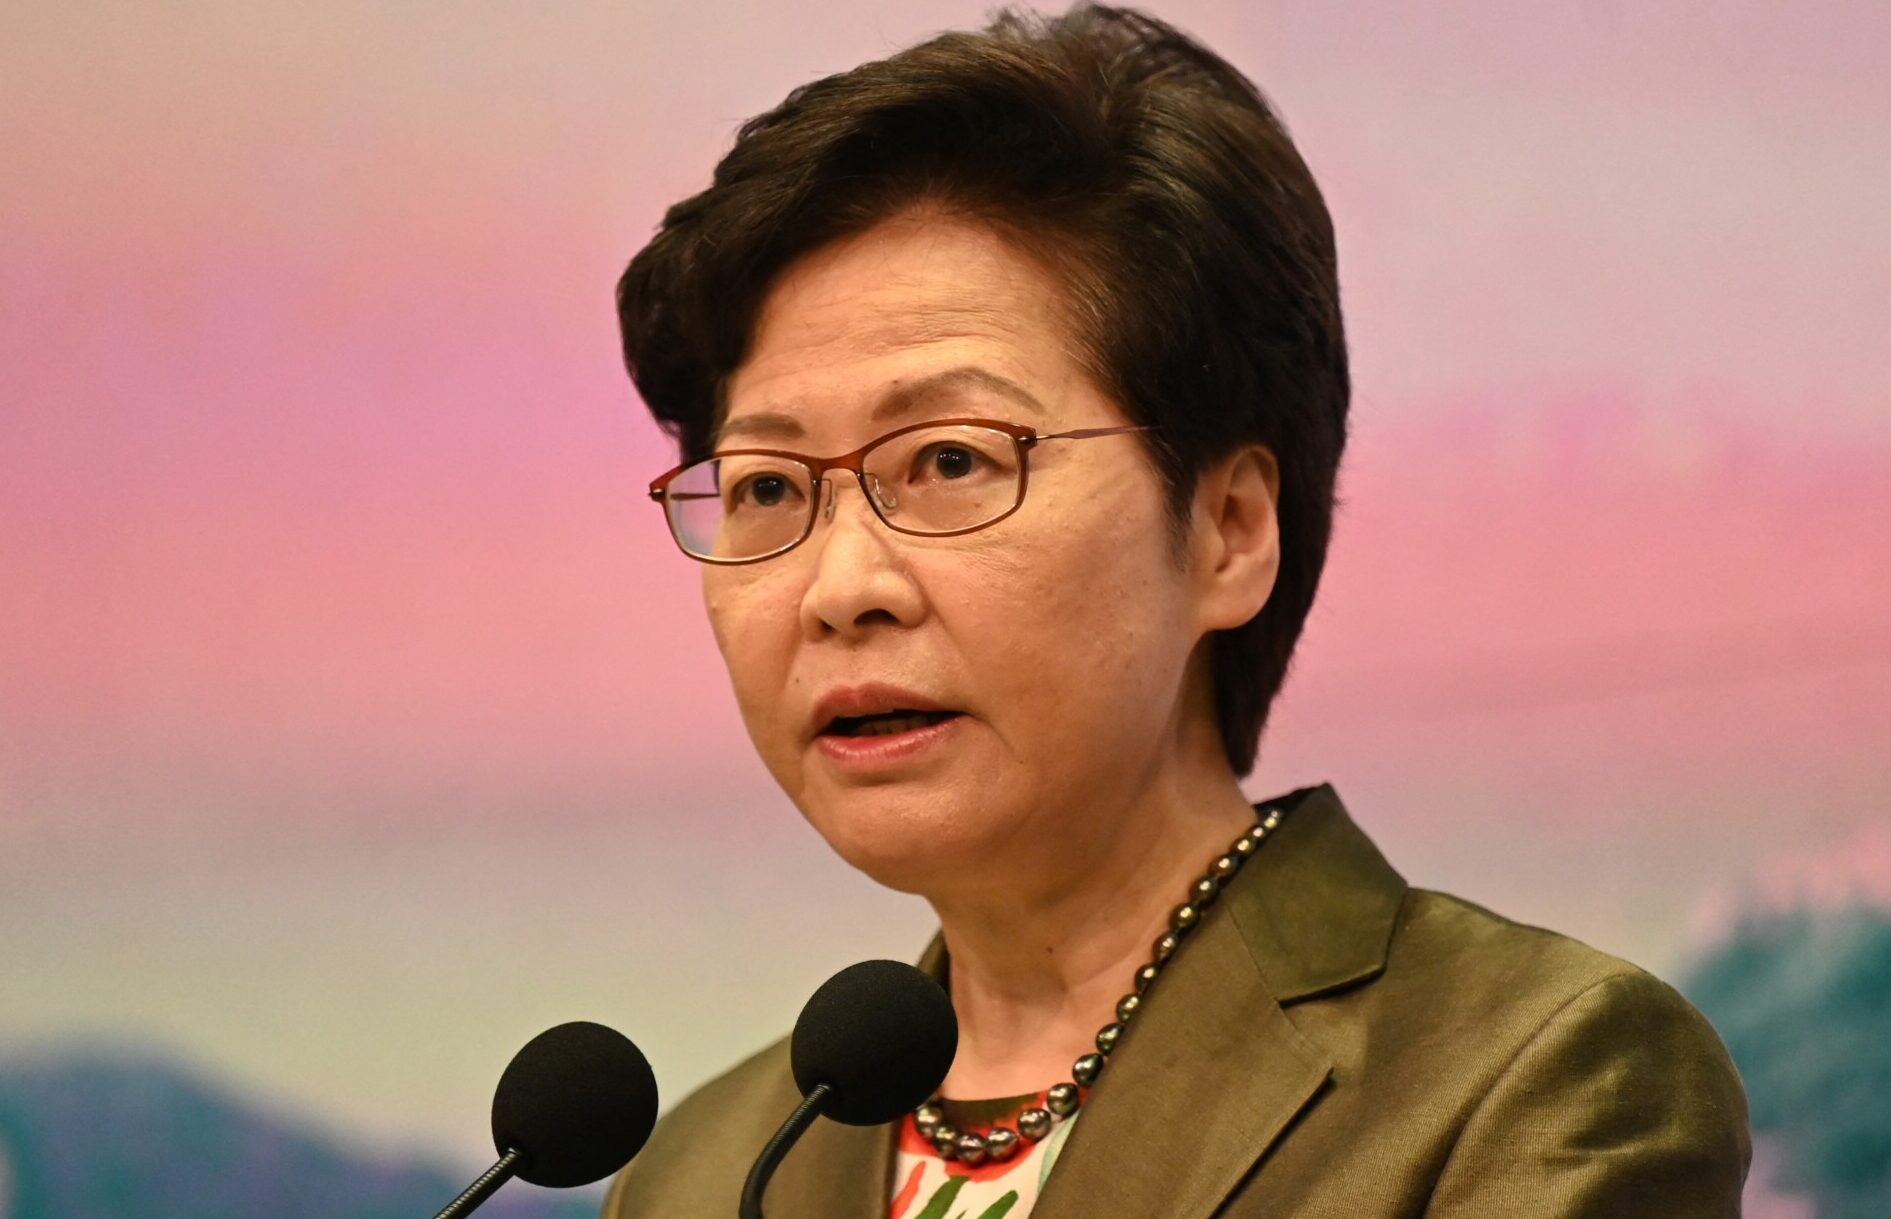 Hong Kong Leader Says ‘Ideologies’ Pose Security Risk Amid Escalating Clampdown on Freedoms